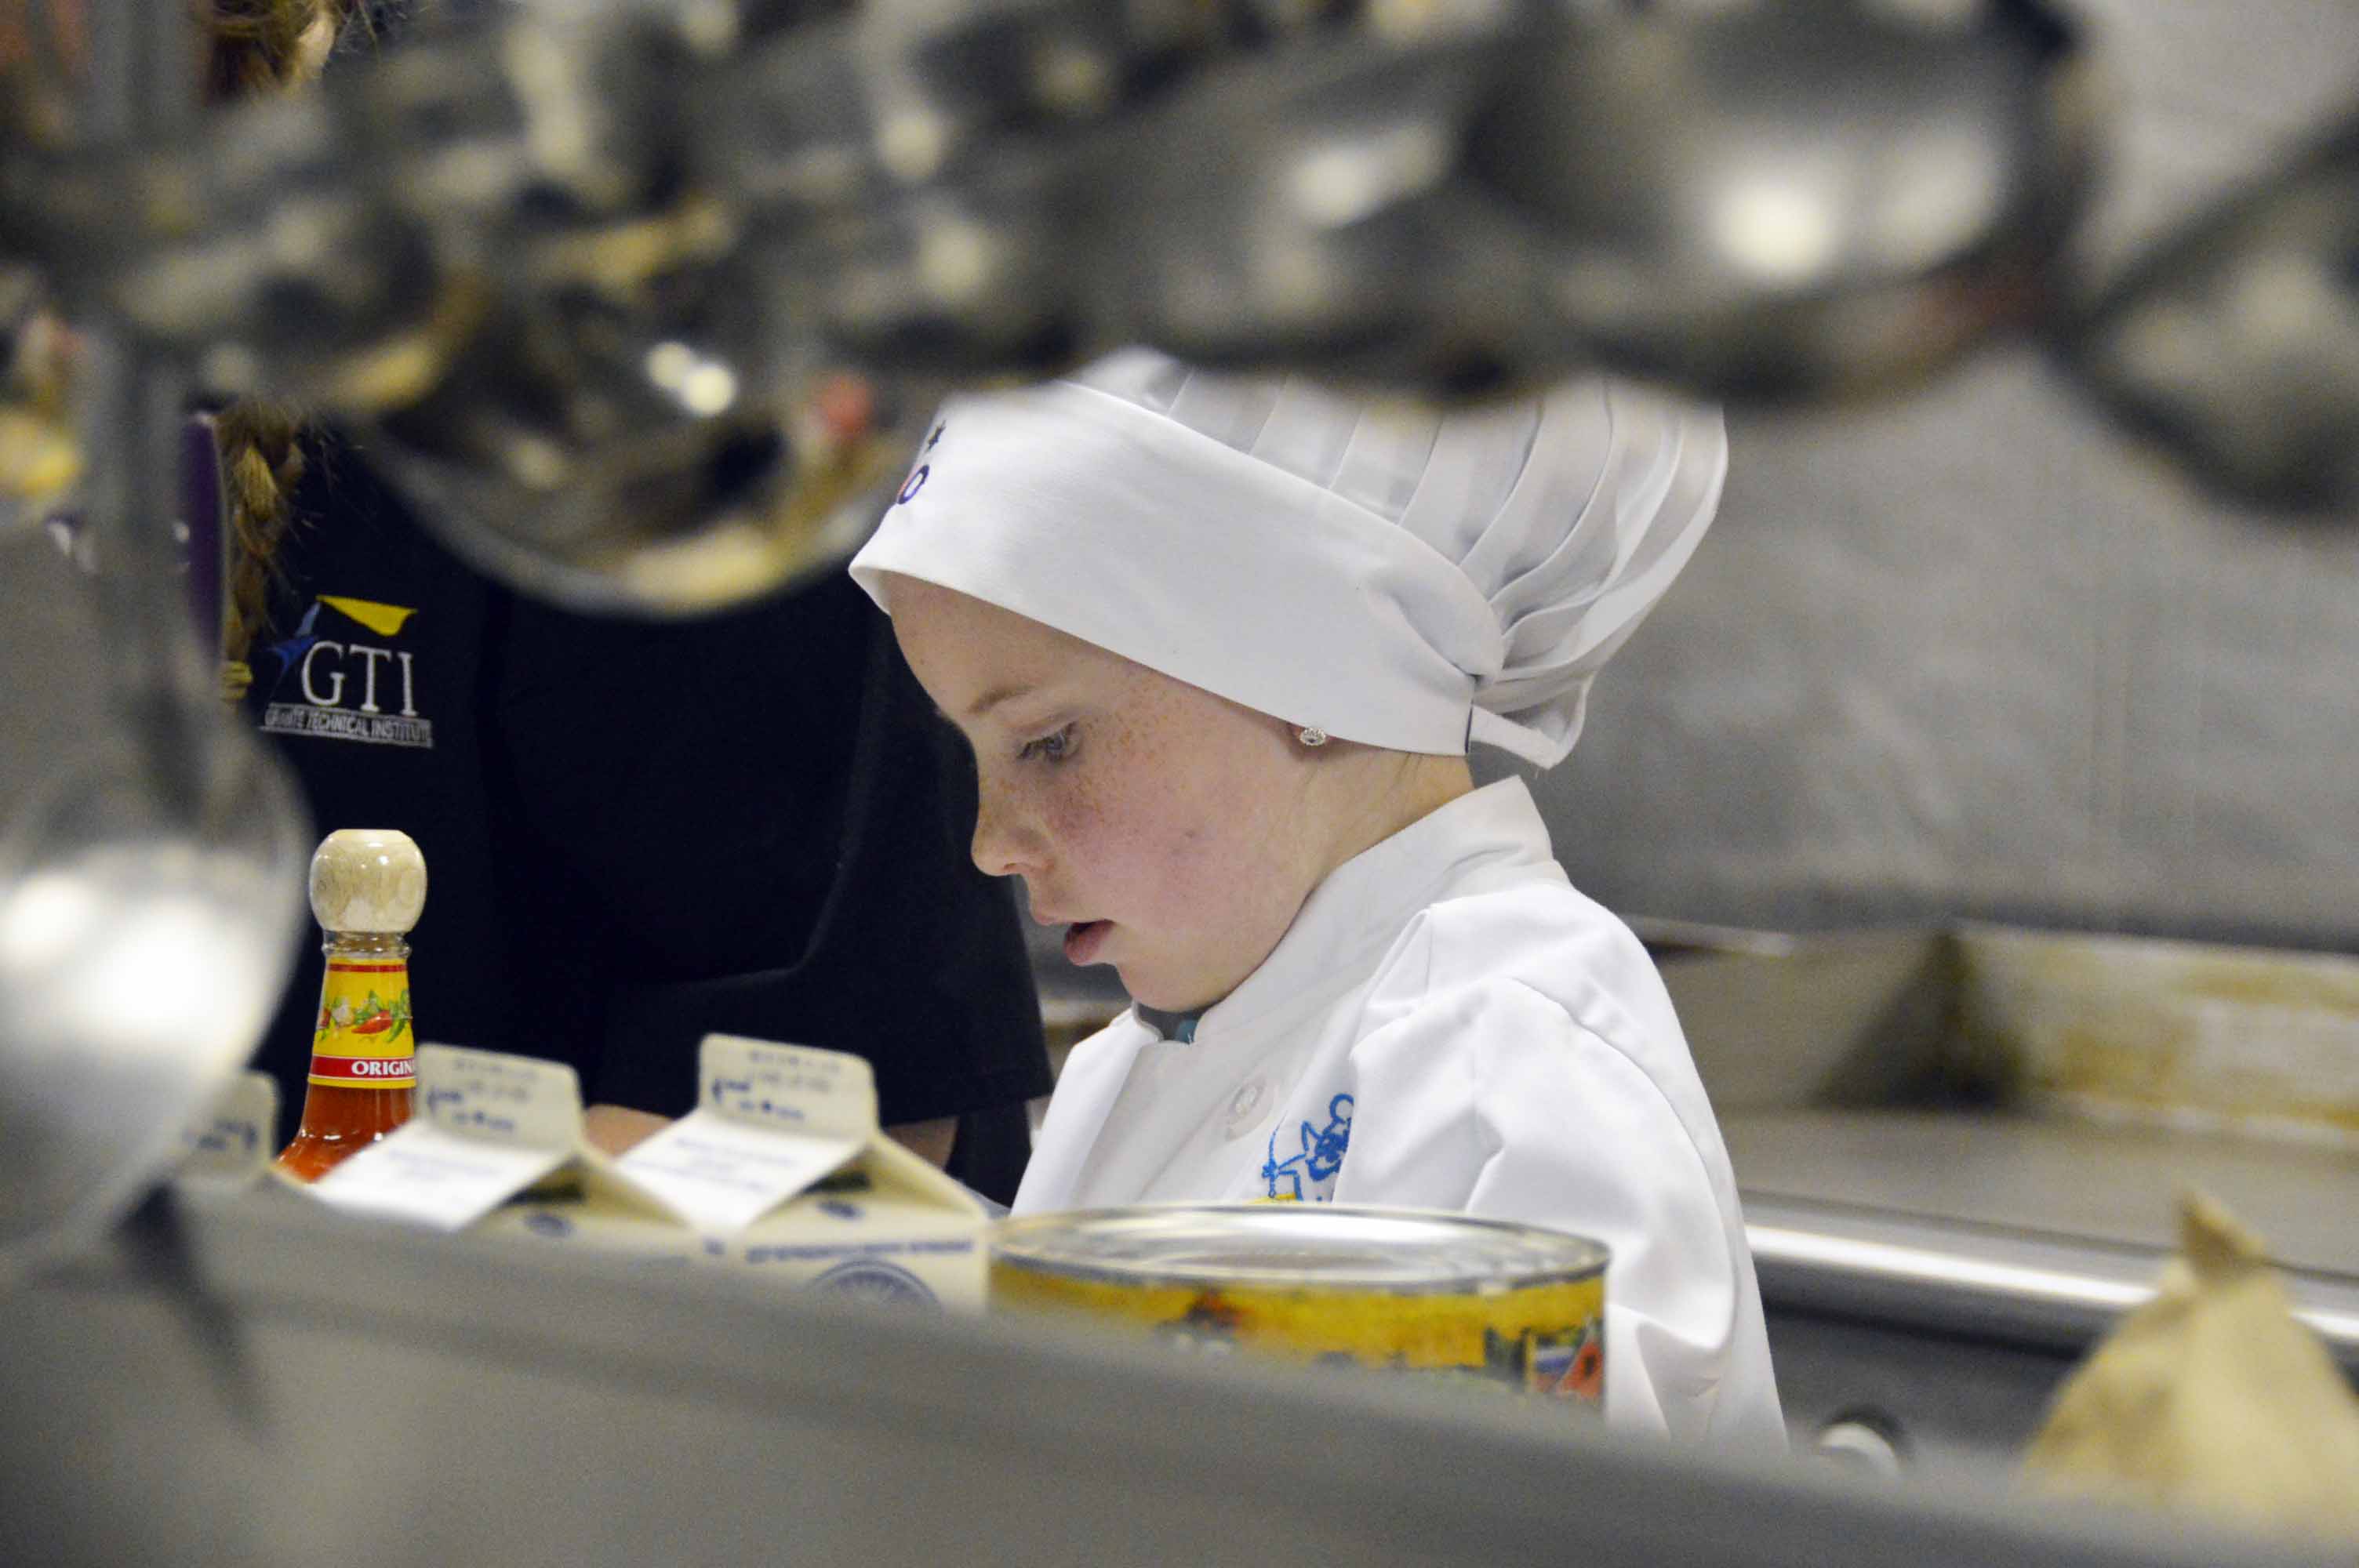 Fourth-graders take over GEC café kitchen for regional culinary competition